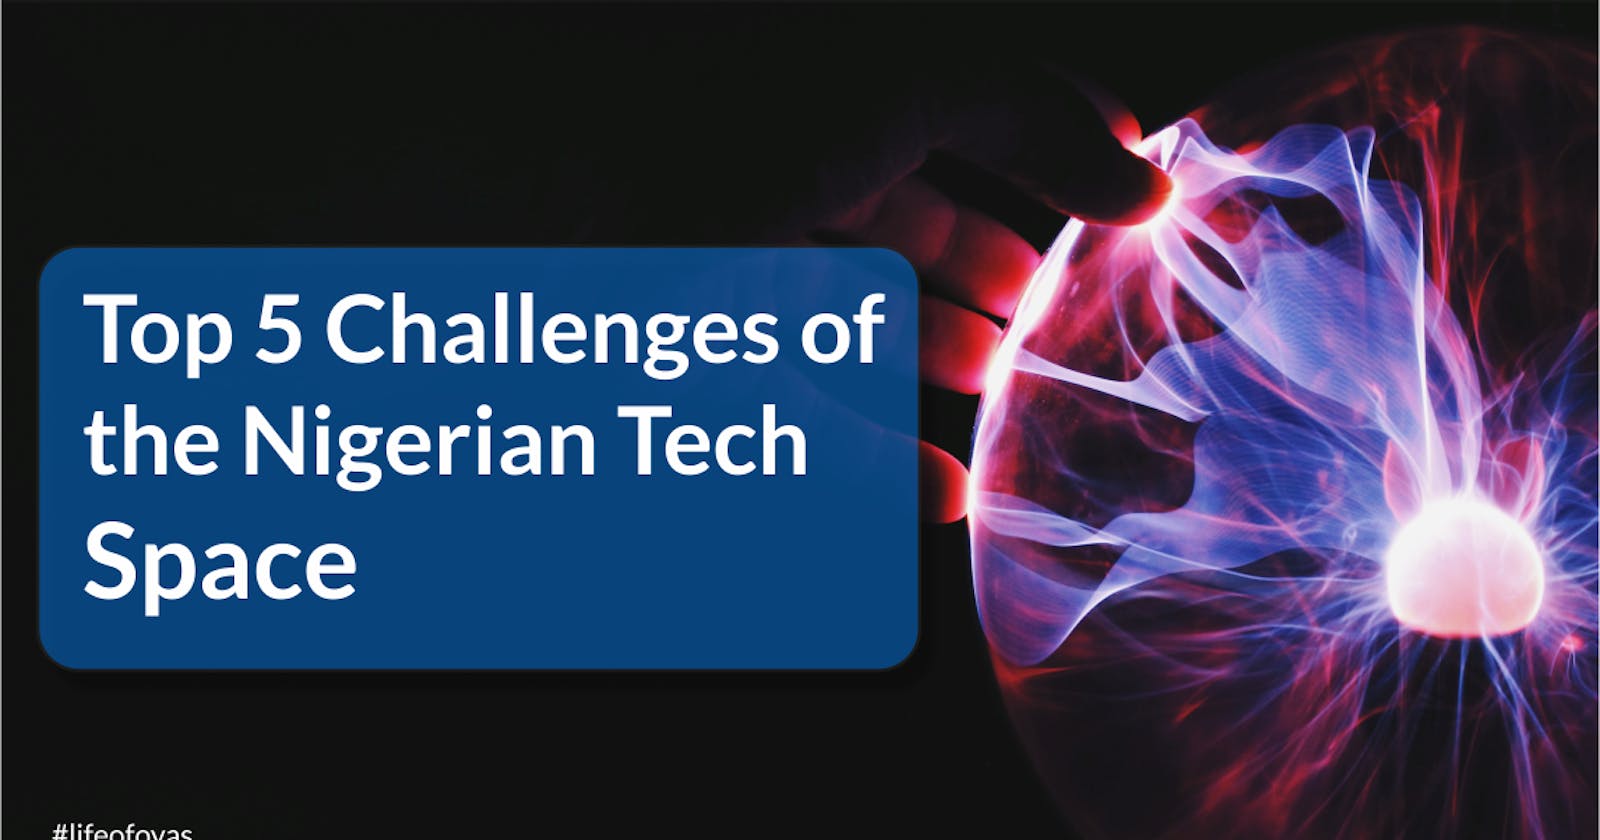 Top 5 Challenges Of The Nigerian Tech Space